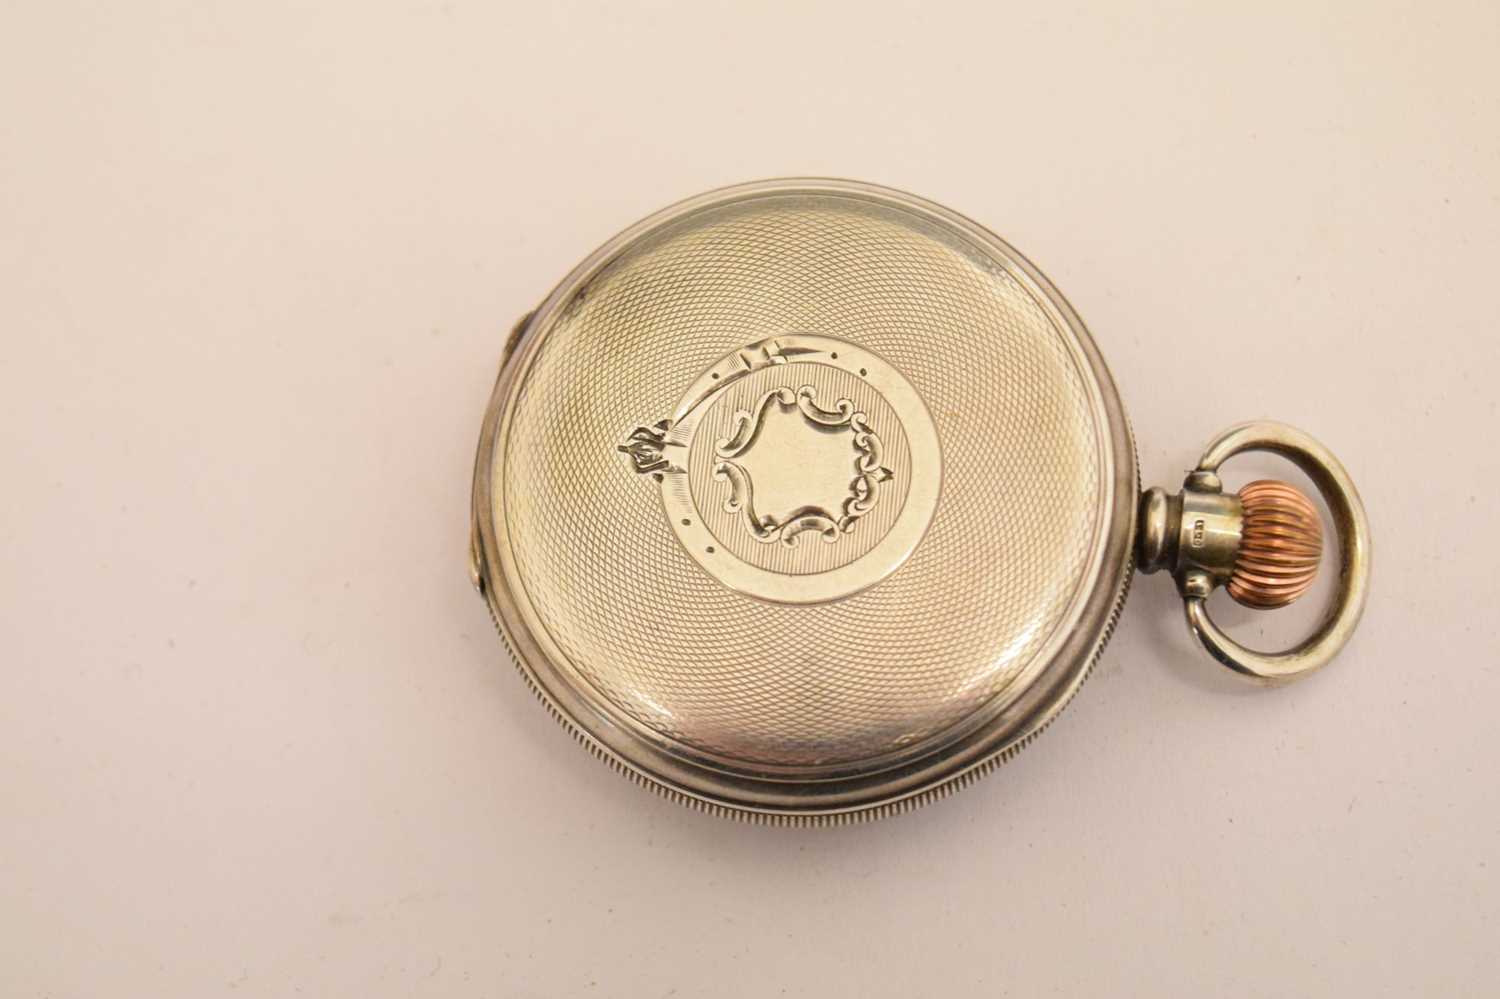 American Waltham Watch Co. - Top wind silver cased pocket watch - Image 11 of 15